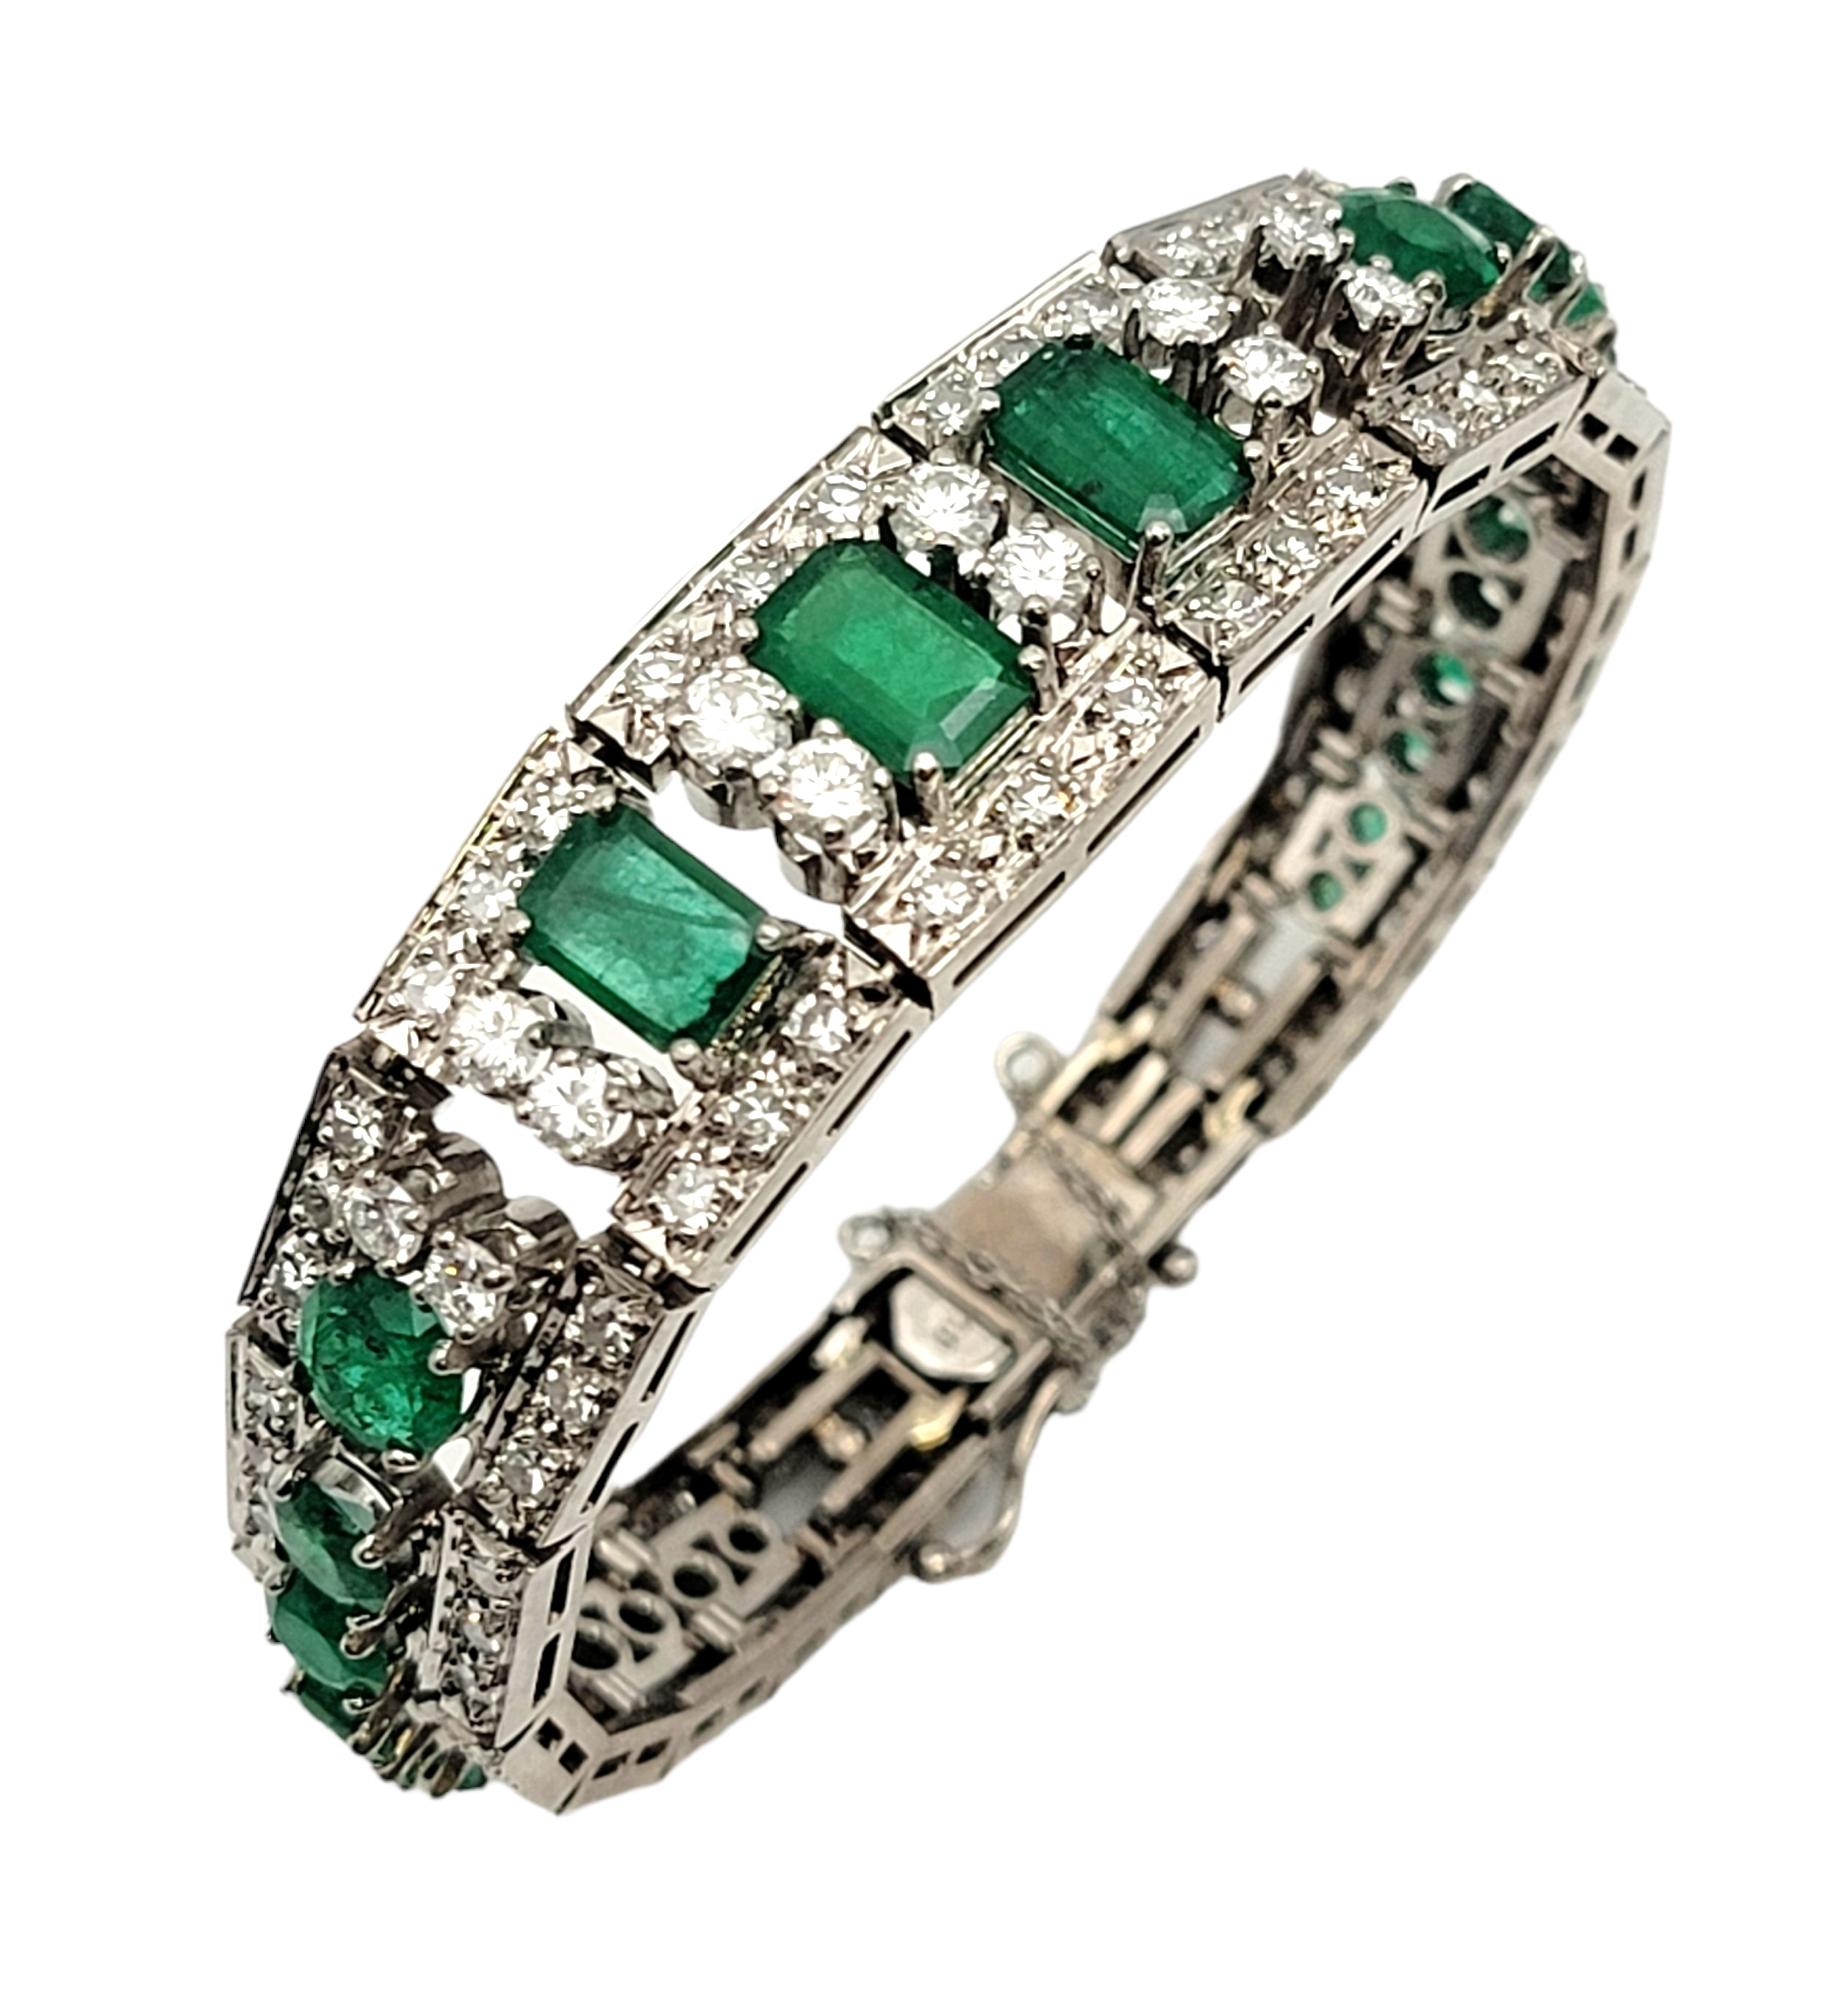 This gorgeous 10.40 carat total weight diamond and emerald bracelet sparkles with vintage elegance and a timeless style. This custom piece features three emerald cut natural emeralds prong set in the center of the bracelet, flanked with sets of two